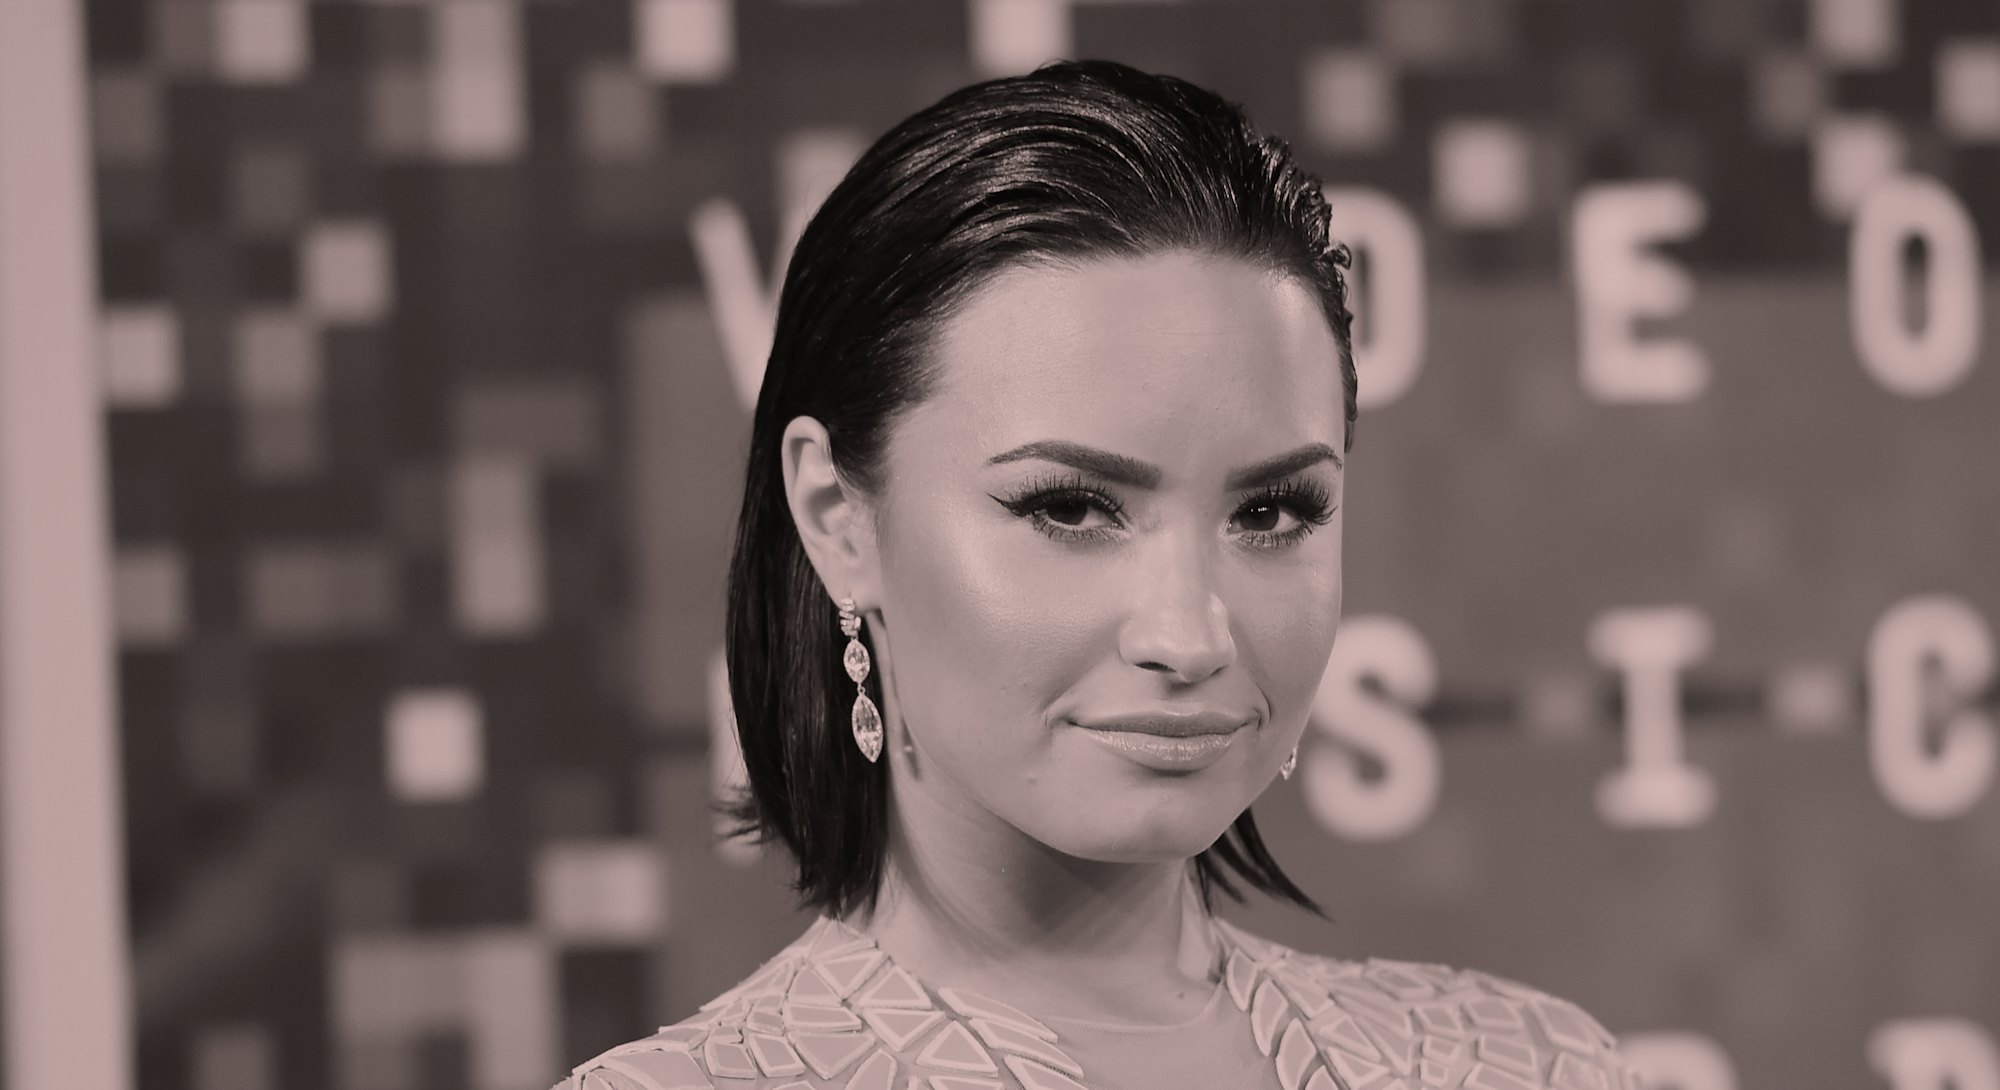 Demi Lovato, with short brown hair tucked behind ears, is wearing a pink dress